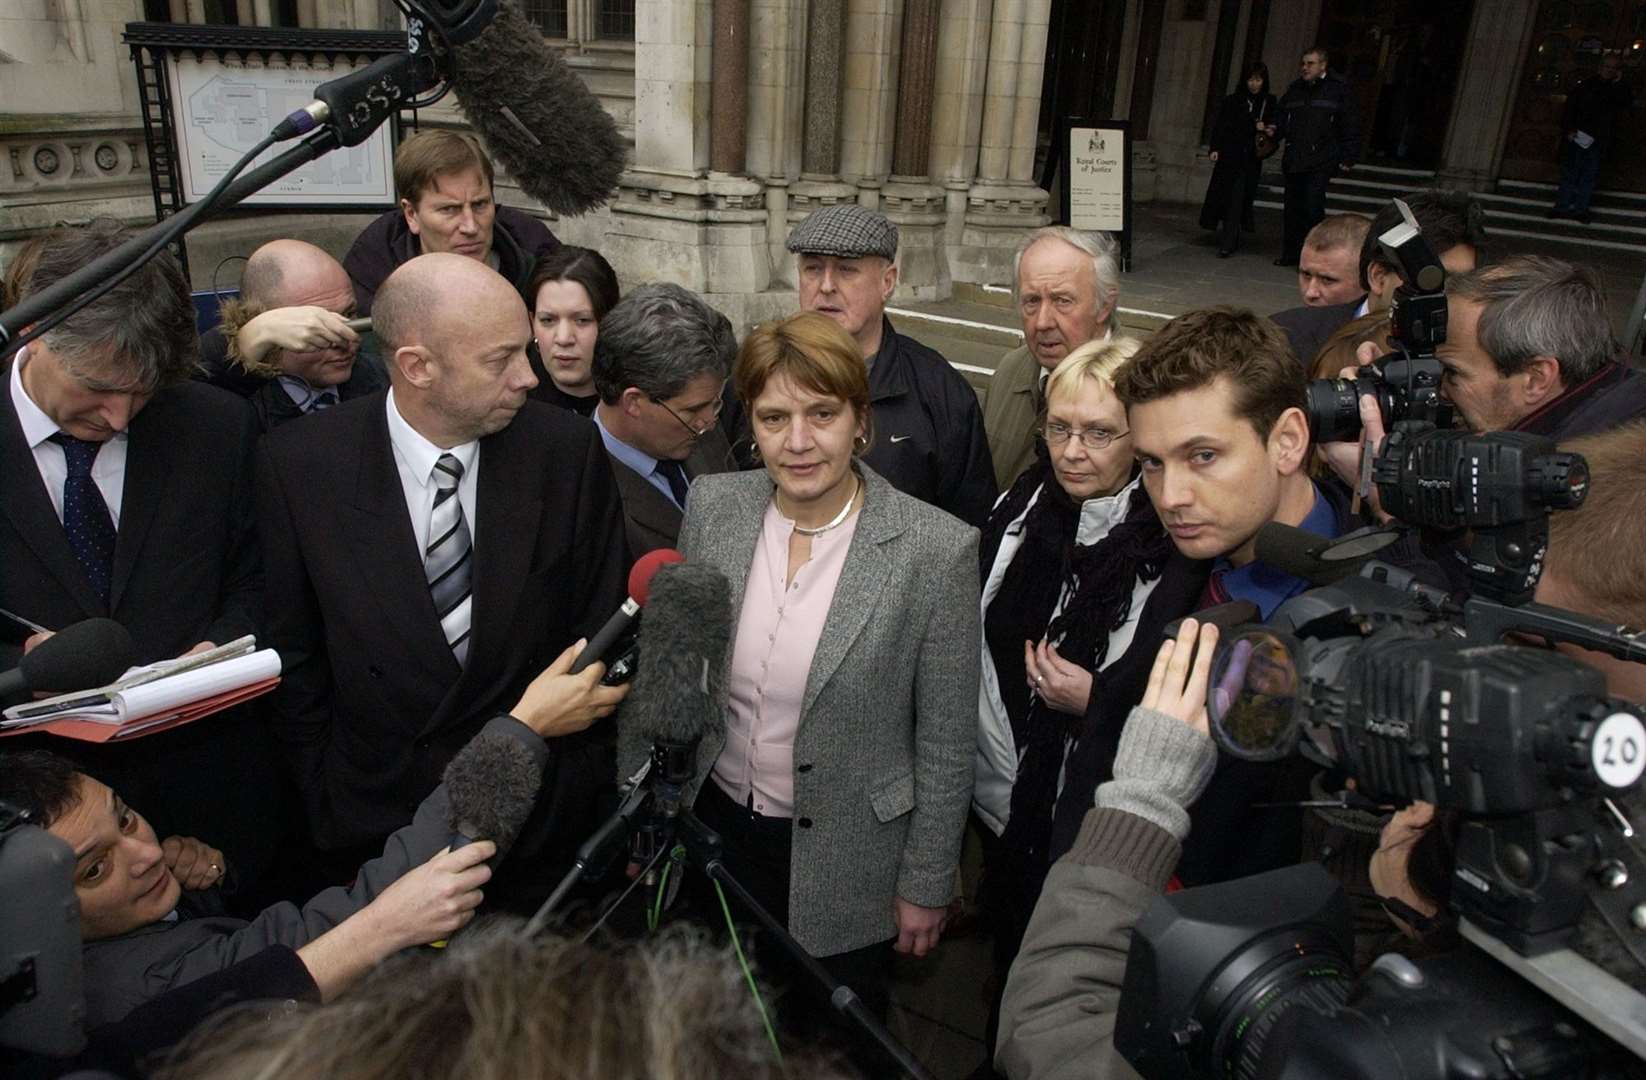 Barbara Stone speaks to the media about her brother's failure in his 2005 appeal